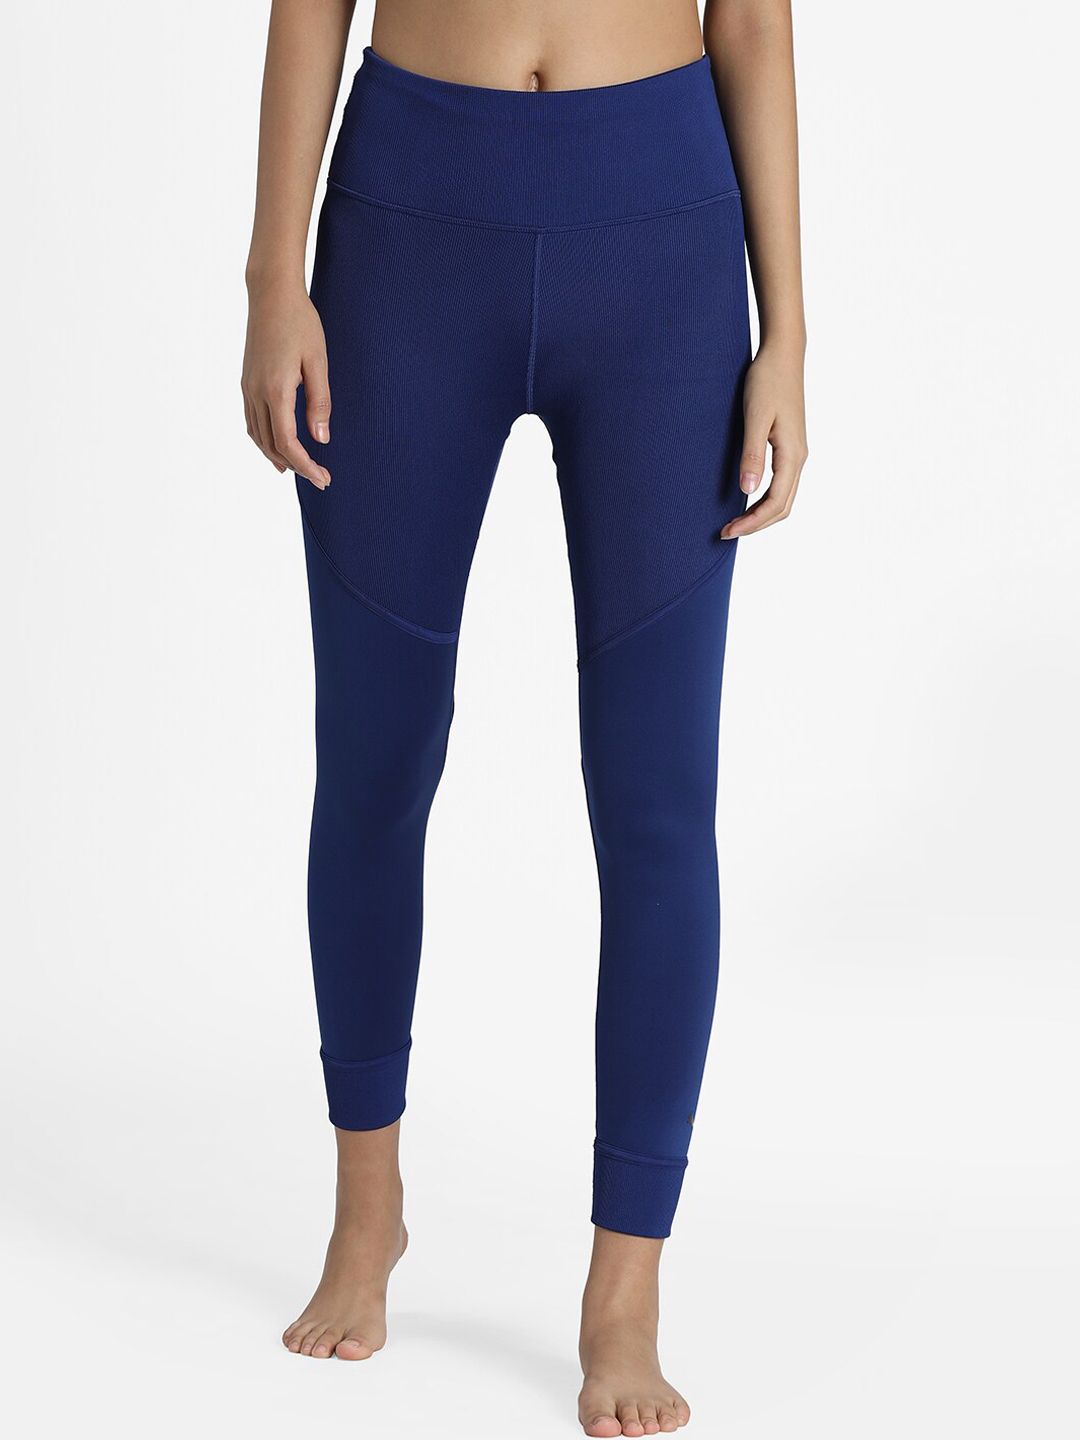 Puma Women Navy Blue Solid Ribbed High Waist  Yoga Tights Price in India